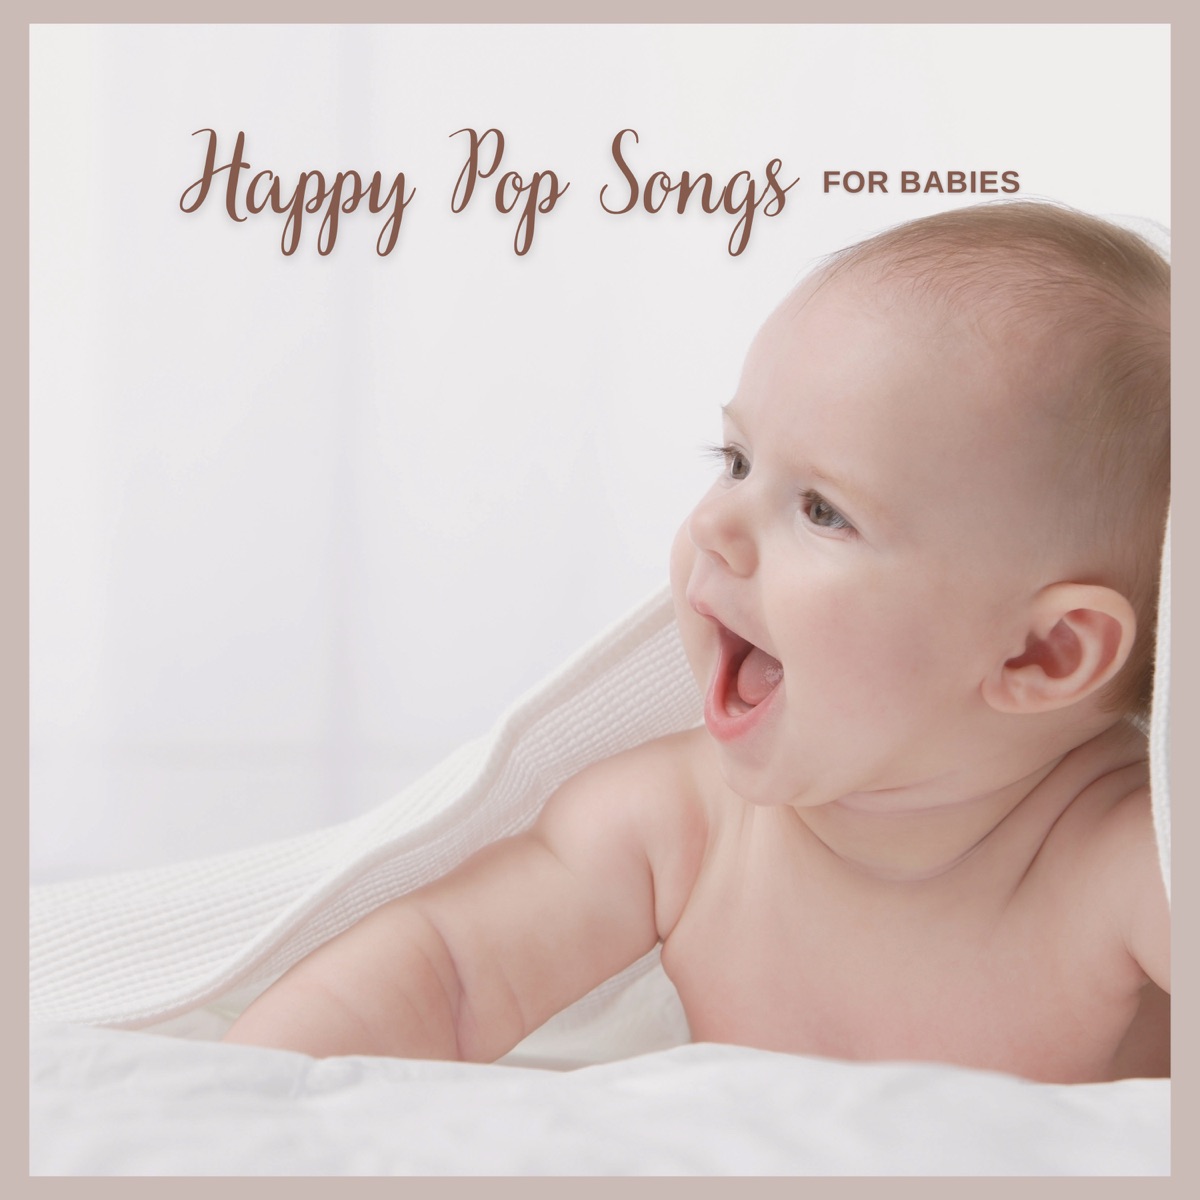 Happy Pop Songs for Babies - Album by Judson Mancebo - Apple Music